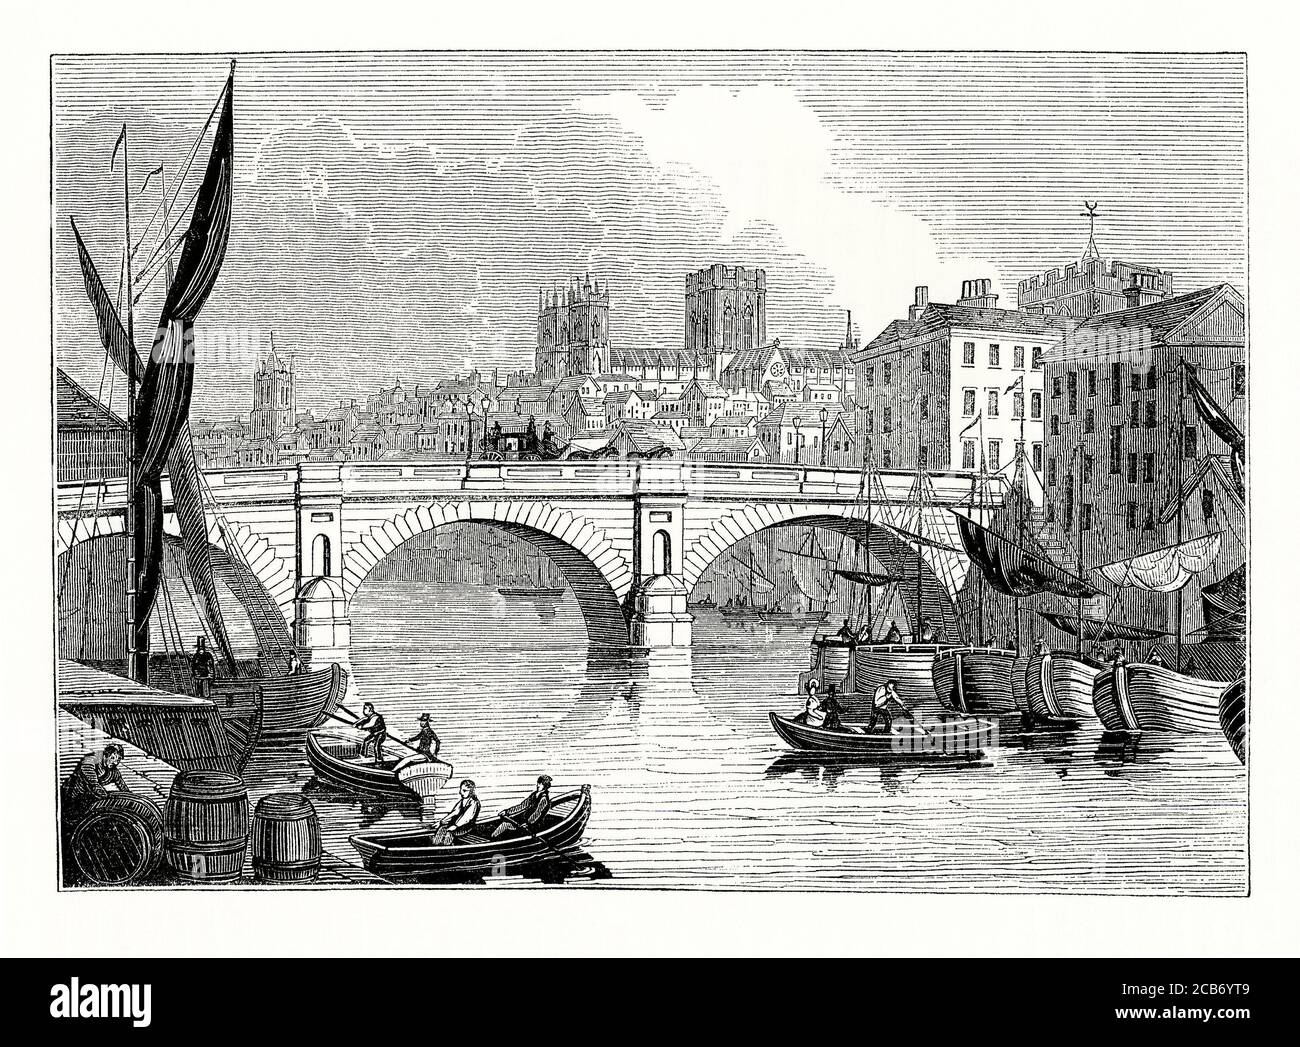 An old engraving of busy river traffic on the River Ouse, York, North Yorkshire, England, UK in the Victorian era. The city is known for its famous historical landmarks such as York Minster (here in the background) and the city walls. In the Middle Ages, York grew as a major wool trading centre. In the 18th and 19th centuries, there was considerable commercial traffic on the river, mainly from downstream Selby. The Ouse Bridge was the main river crossing. Several versions were built. The bridge here is the New Ouse Bridge, designed by Peter Atkinson the younger, completed in 1821. Stock Photo